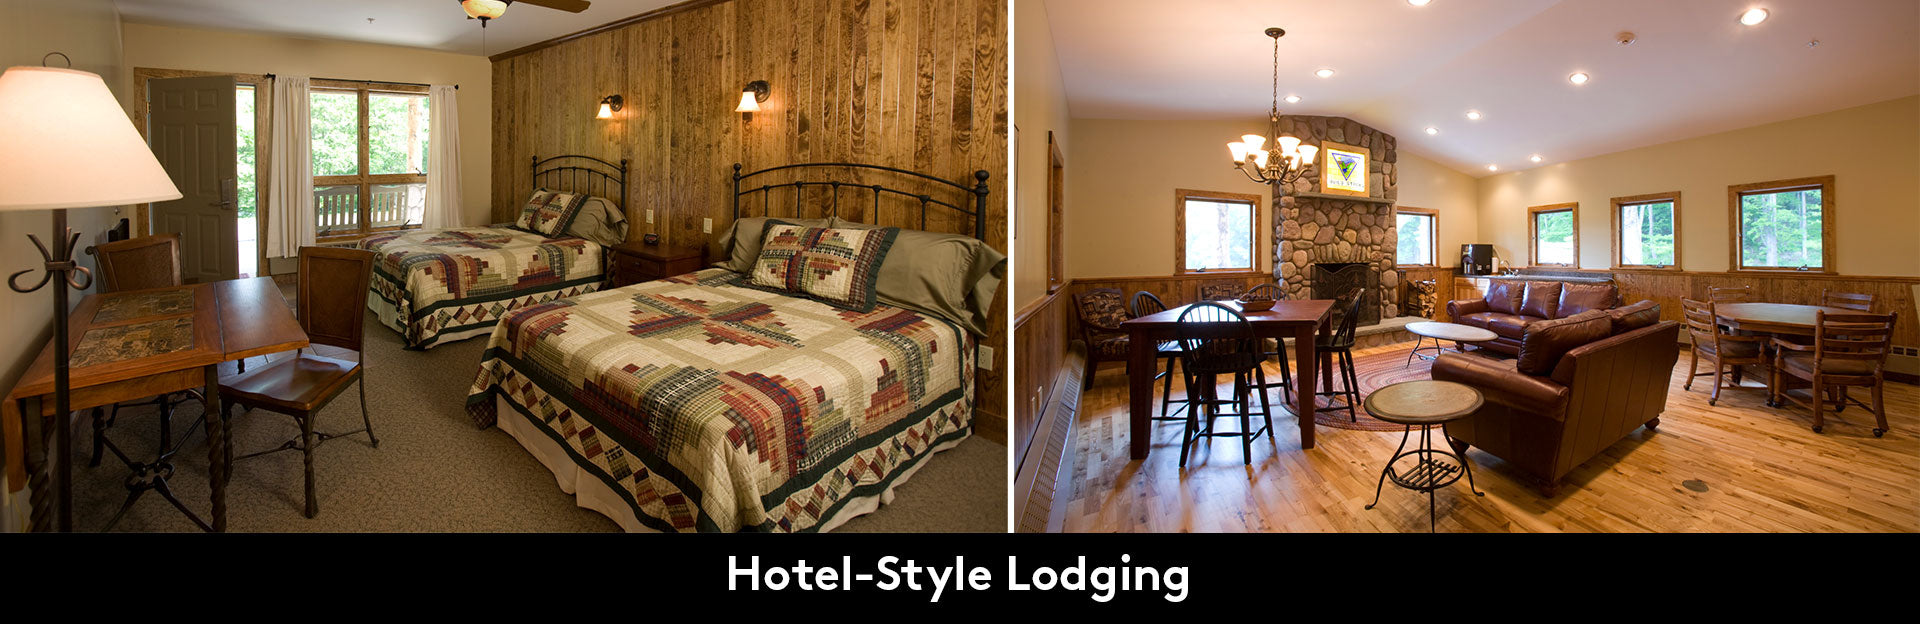 Hotel-Style Lodge for Camp Workroom Social's Fall Camp, a sewing retreat for adults